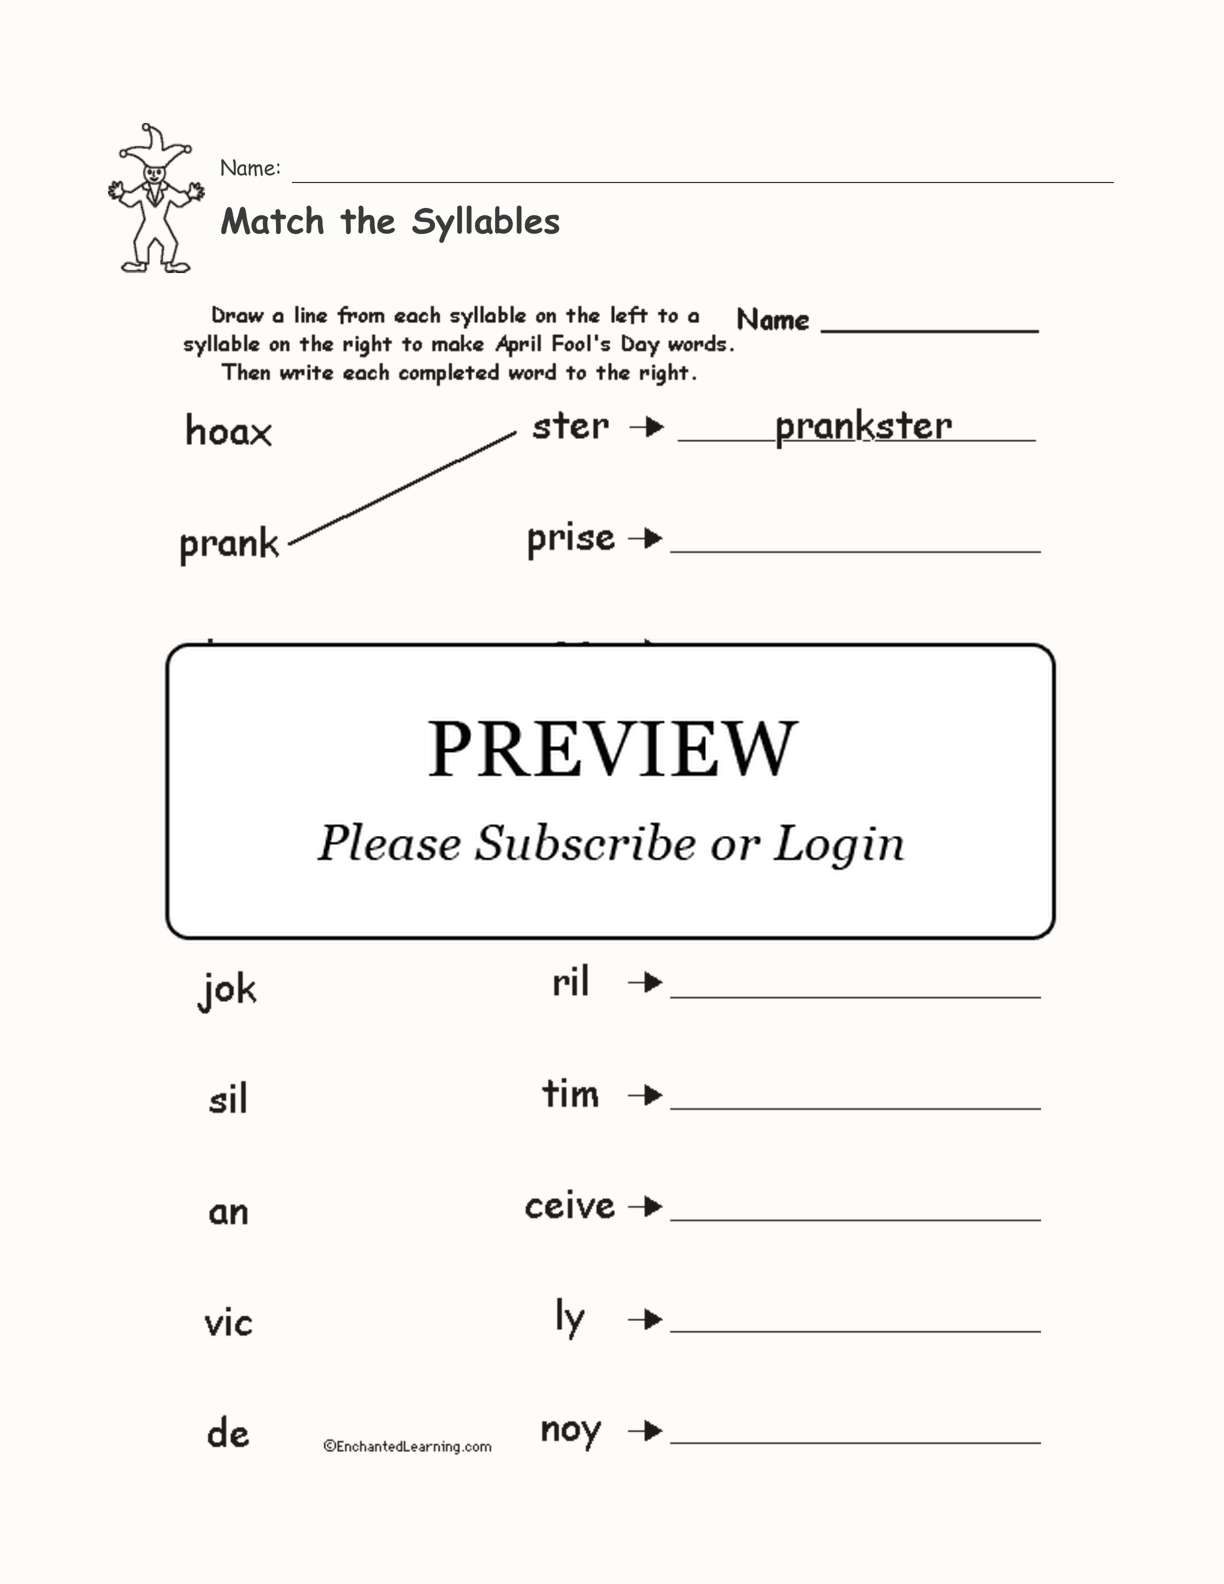 Match the Syllables interactive worksheet page 1